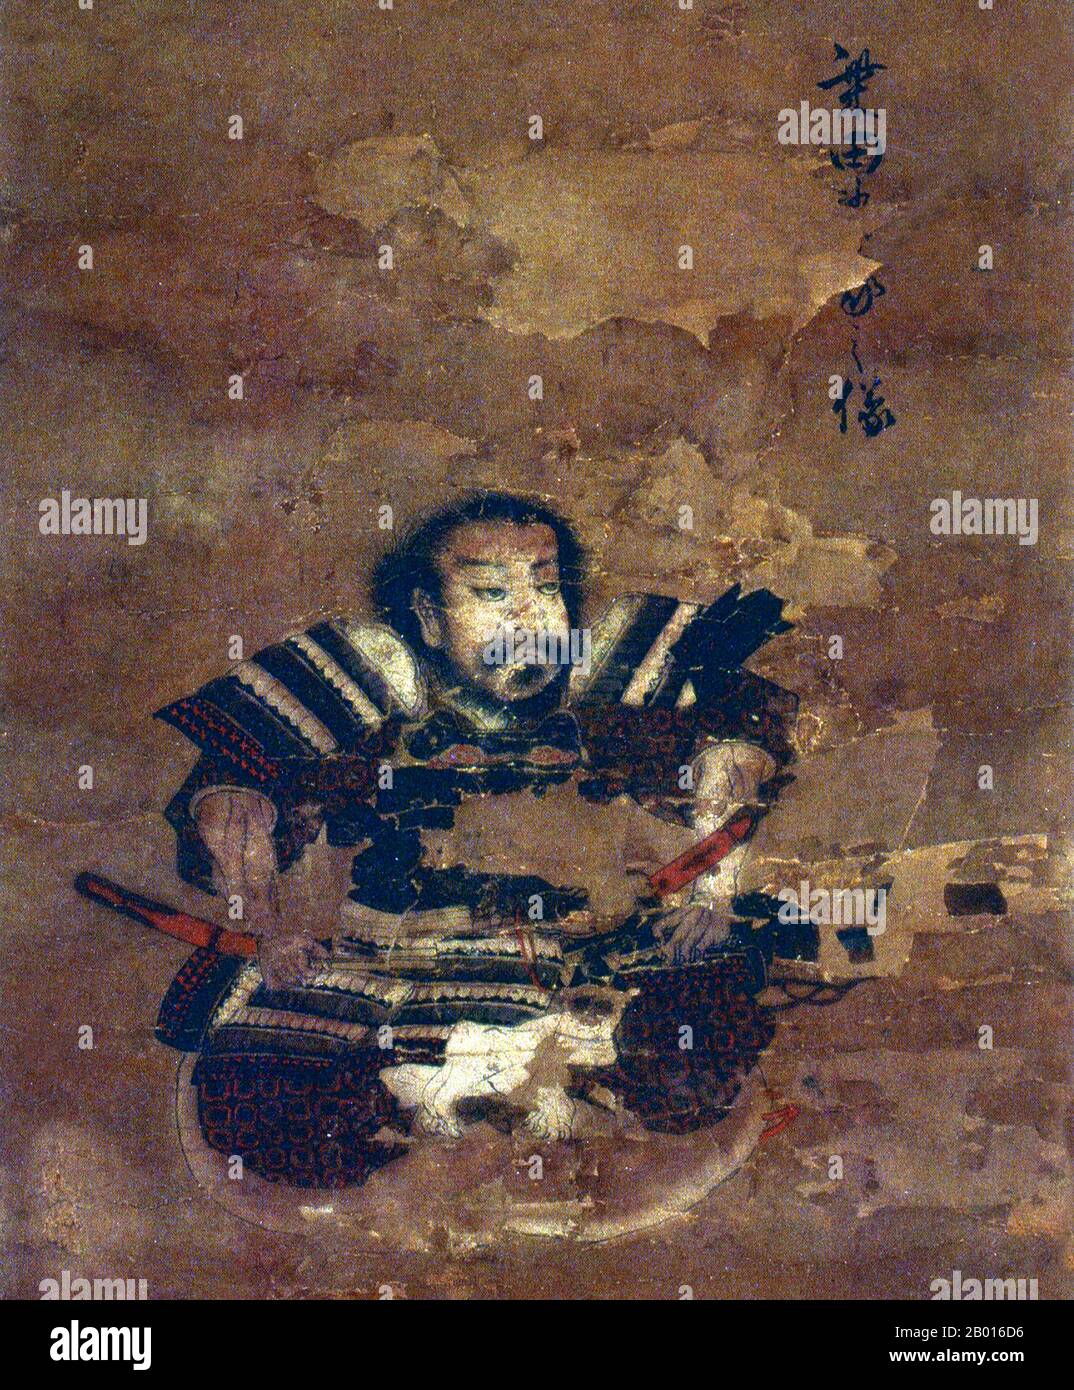 Japan: Shibata Katsuie  (1522 – 14 June 1583), samurai and military commander during the Sengoku Period. Hanging scroll painting, late 16th century.  Katsuie, also known as Gonroku, was a samurai and retainer of Oda Nobuyuki, supporting his lord against his elder brother Oda Nobunaga. When Nobuyuki was executed in 1556, Katsuie was spared for his bravery and loyalty. He became renowned for his victories and martial skill, aiding in Nobunaga's unification of Japan. When his master died in 1582, Katsuie supported Nobunaga's grandson Oda Nobutaka and fought against Toyotomi Hideyoshi. Stock Photo